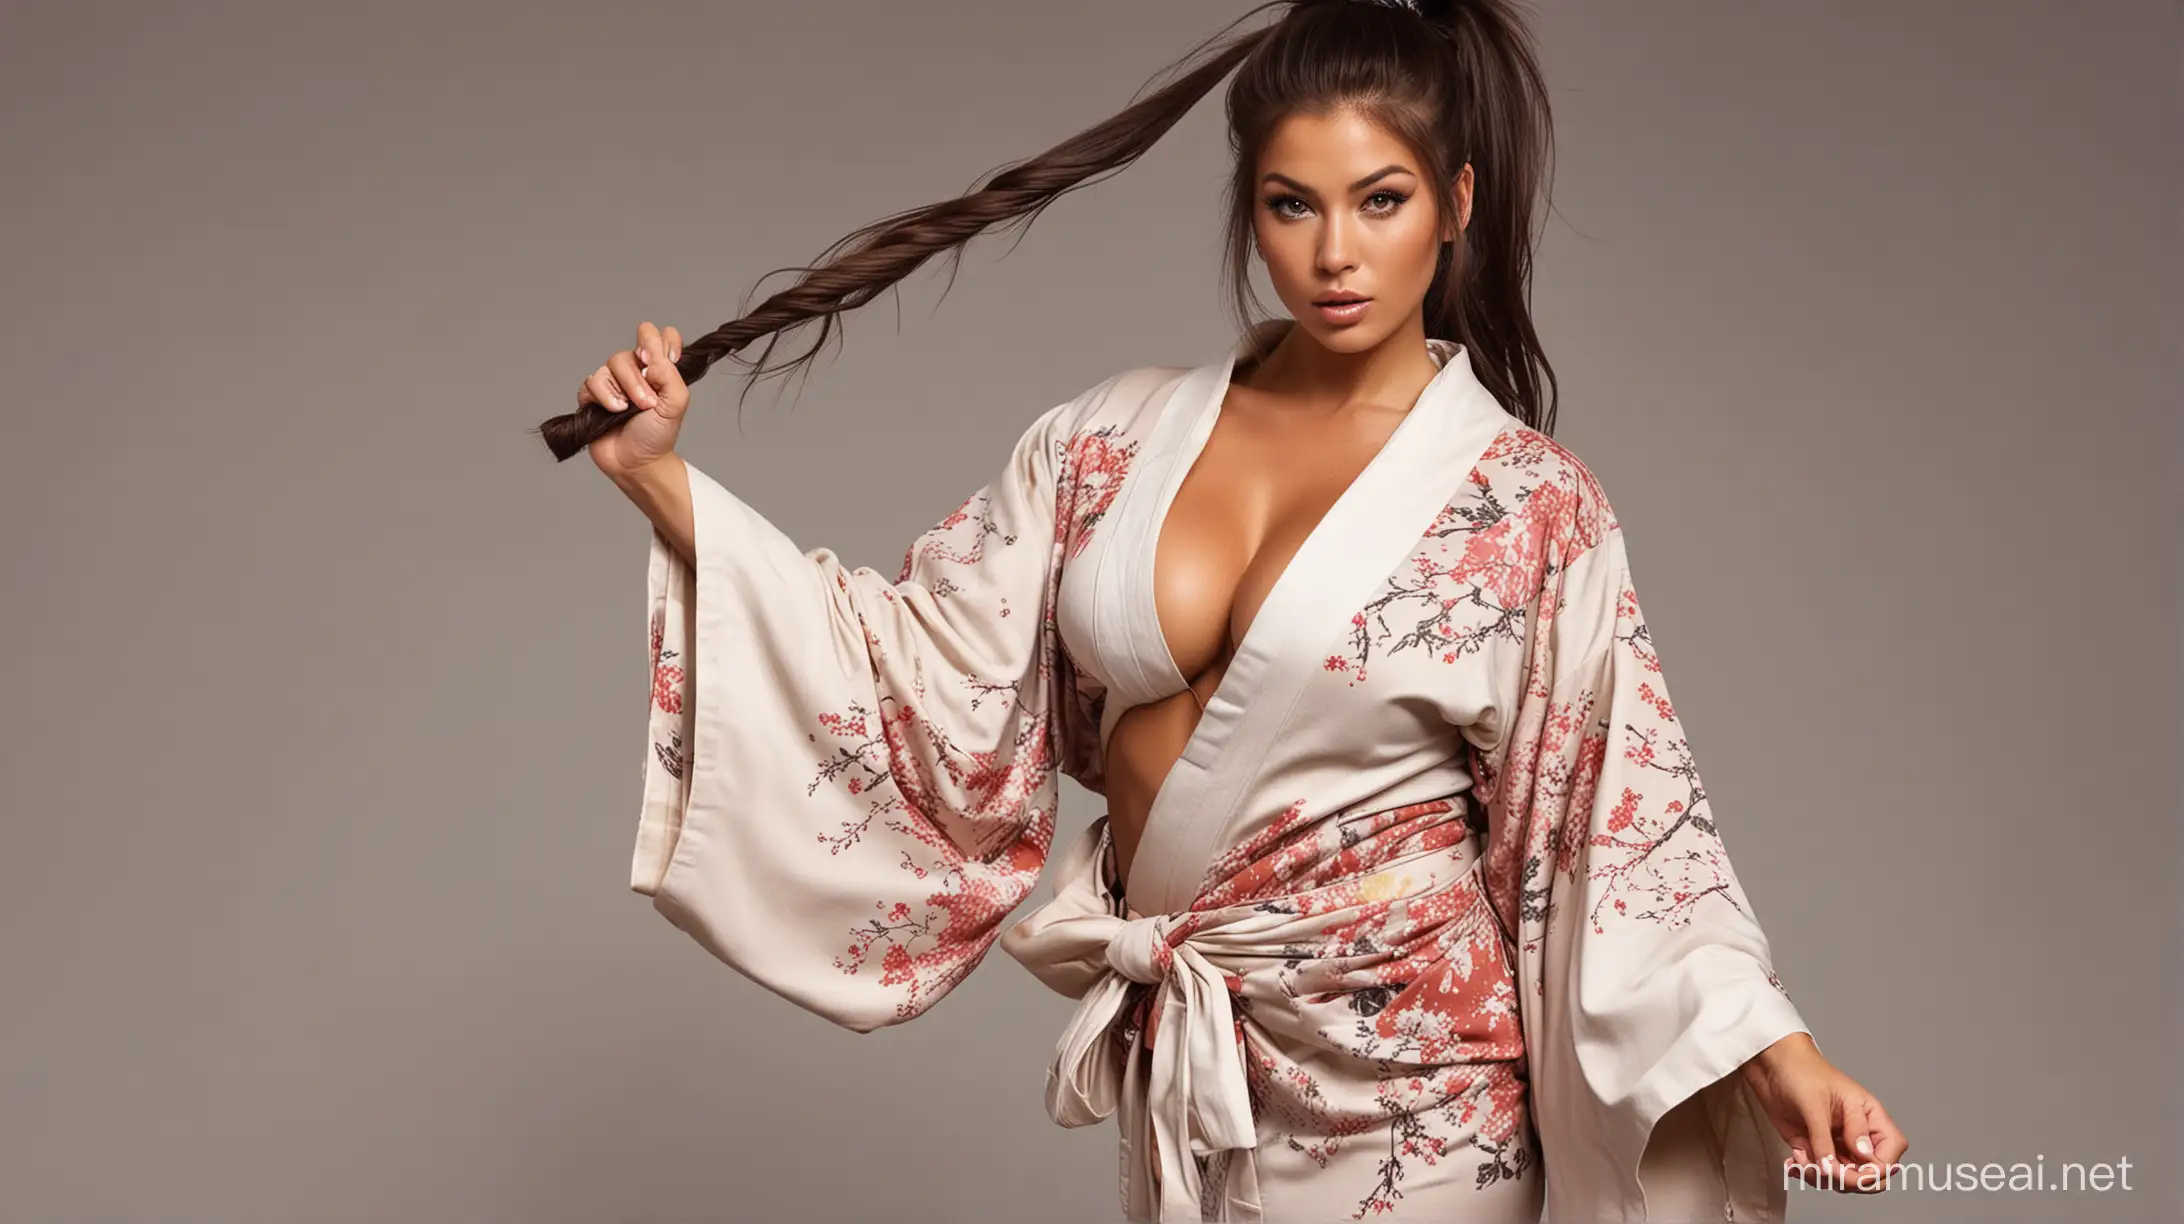 Seductive Giantess with Muscular Physique in Kimono Sleeves